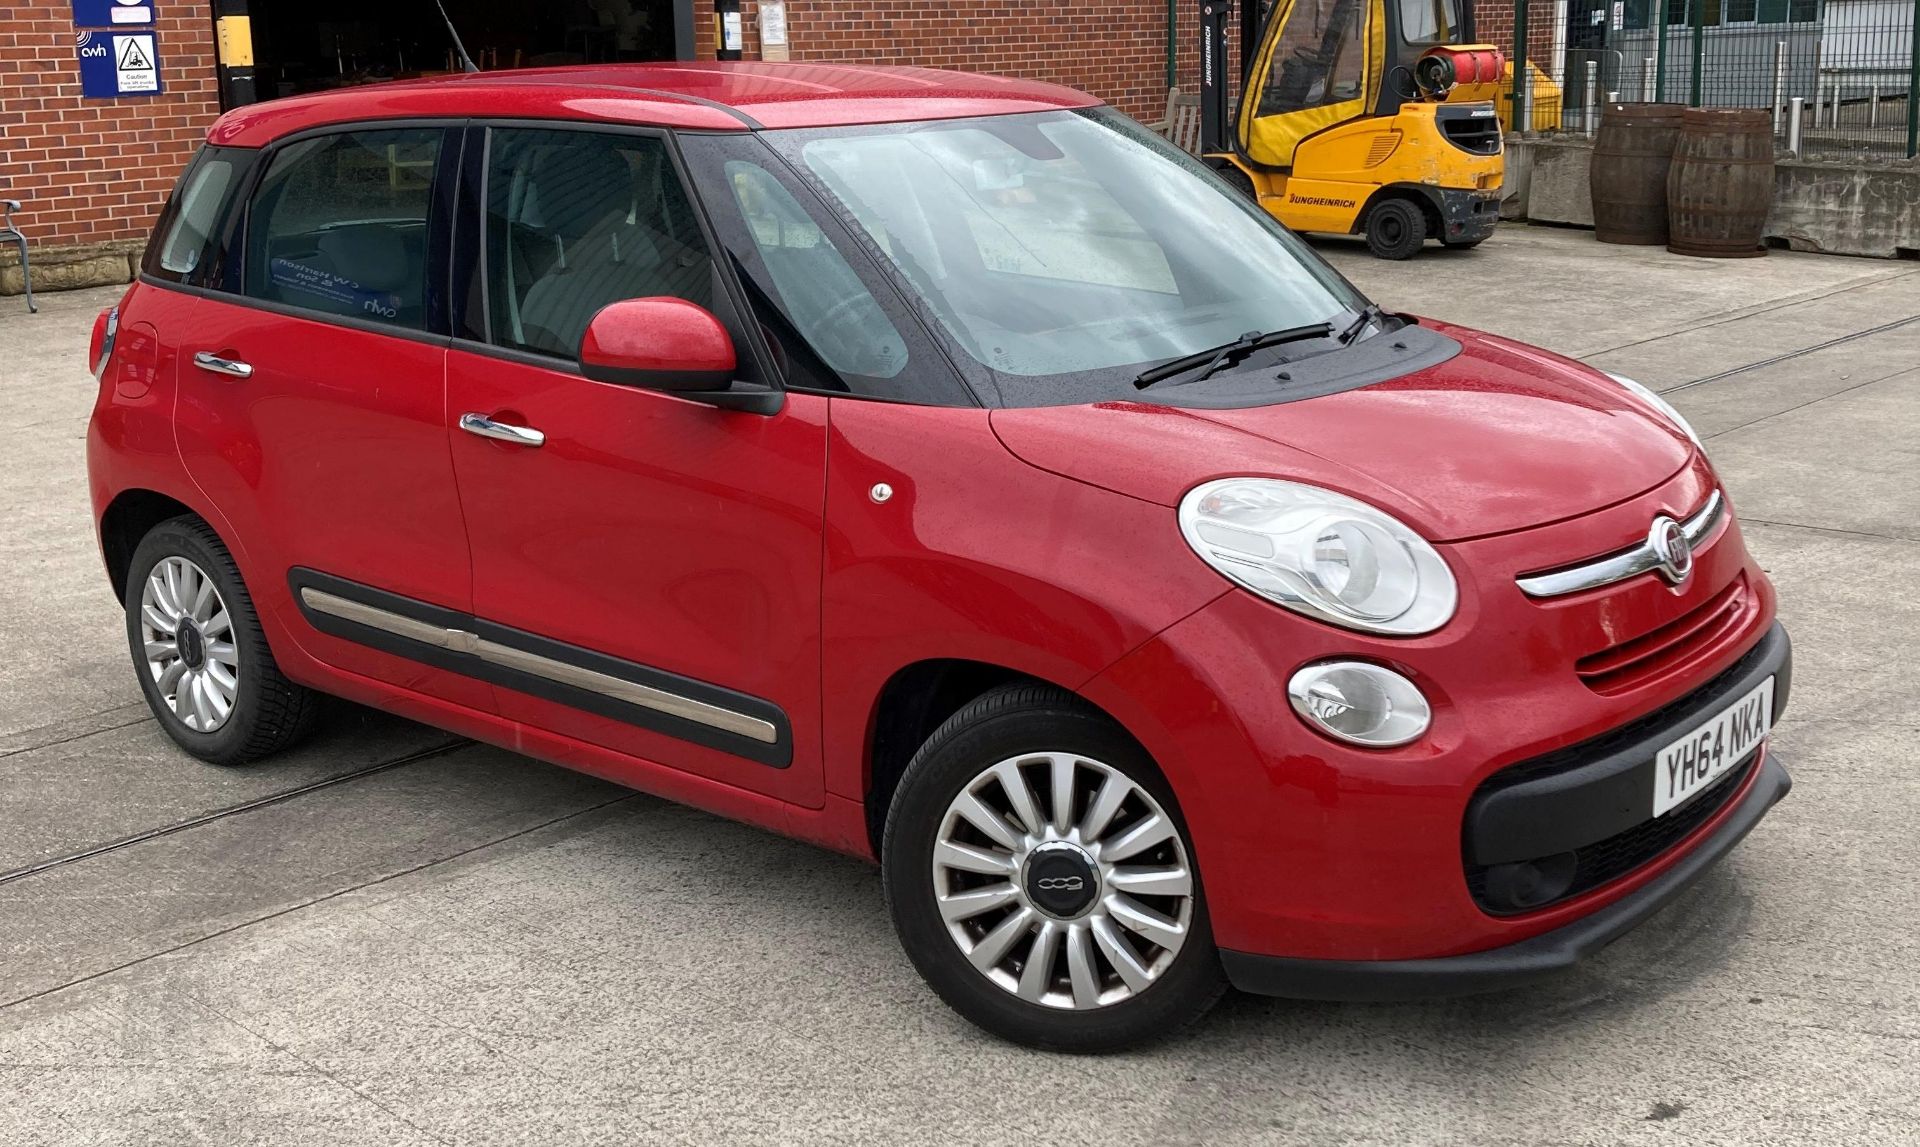 FIAT 500L POP STAR MULTI-JET 1.2 MPV - DIESEL - RED. On the instructions of: A retained client. - Bild 2 aus 16